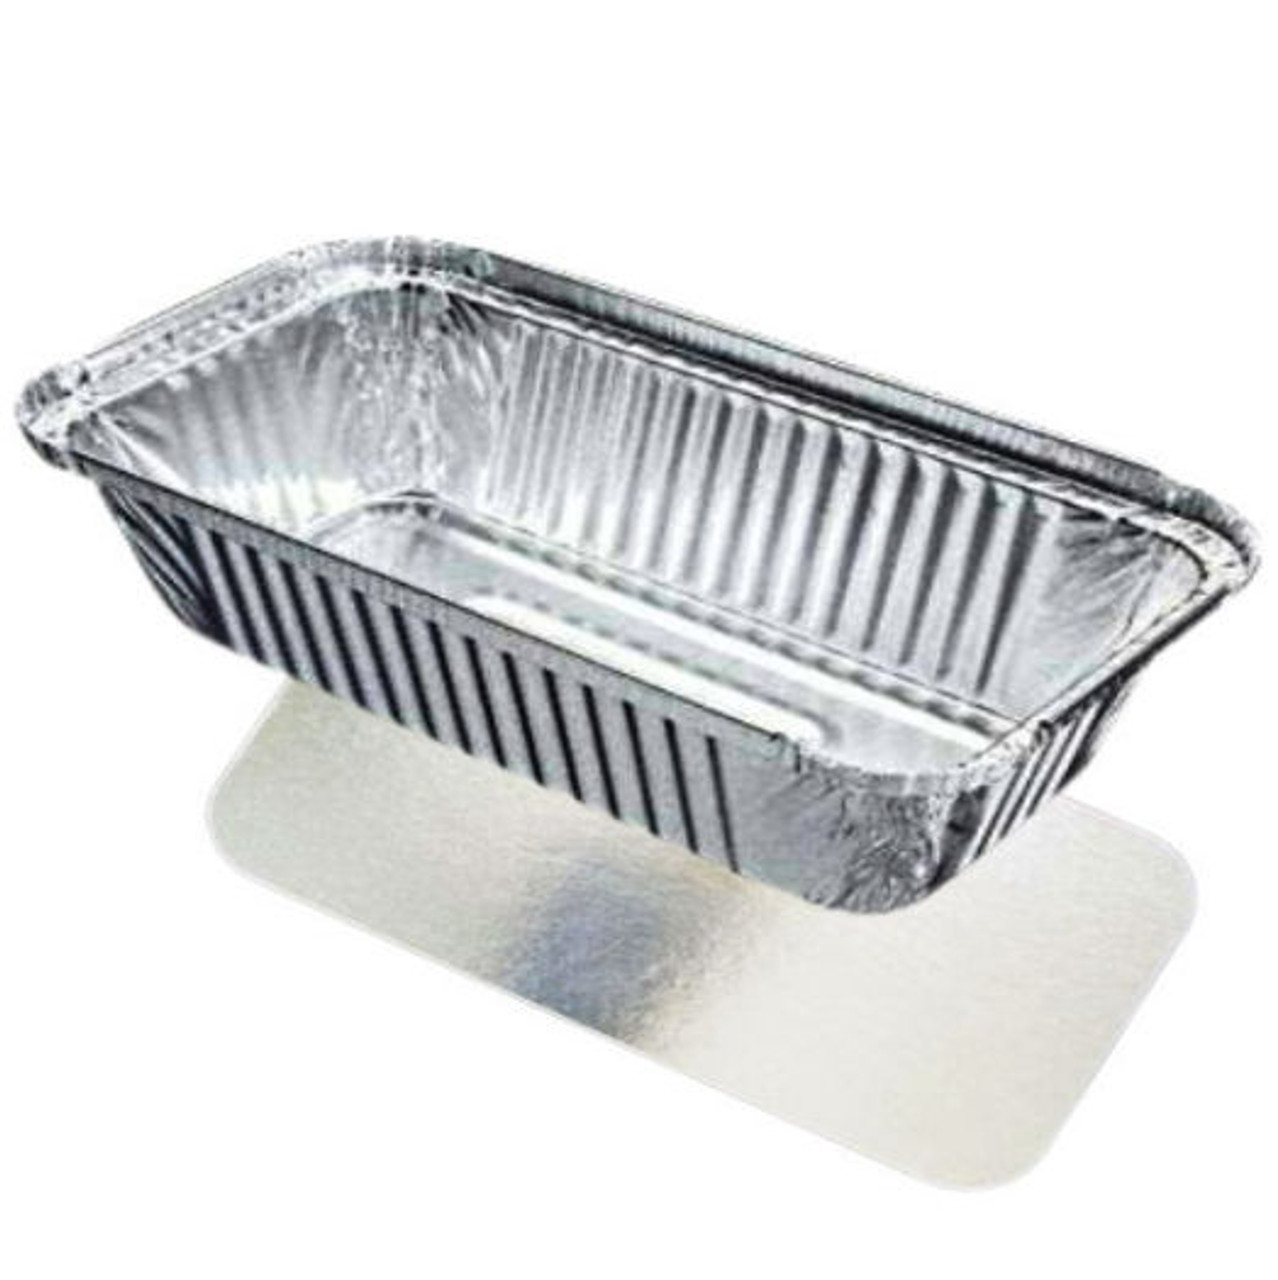 9"x 5"x 2" ( 225 x 125 x 50mm ) Long Oblong Foil Containers and LIDS Specials ( Case of 50 )